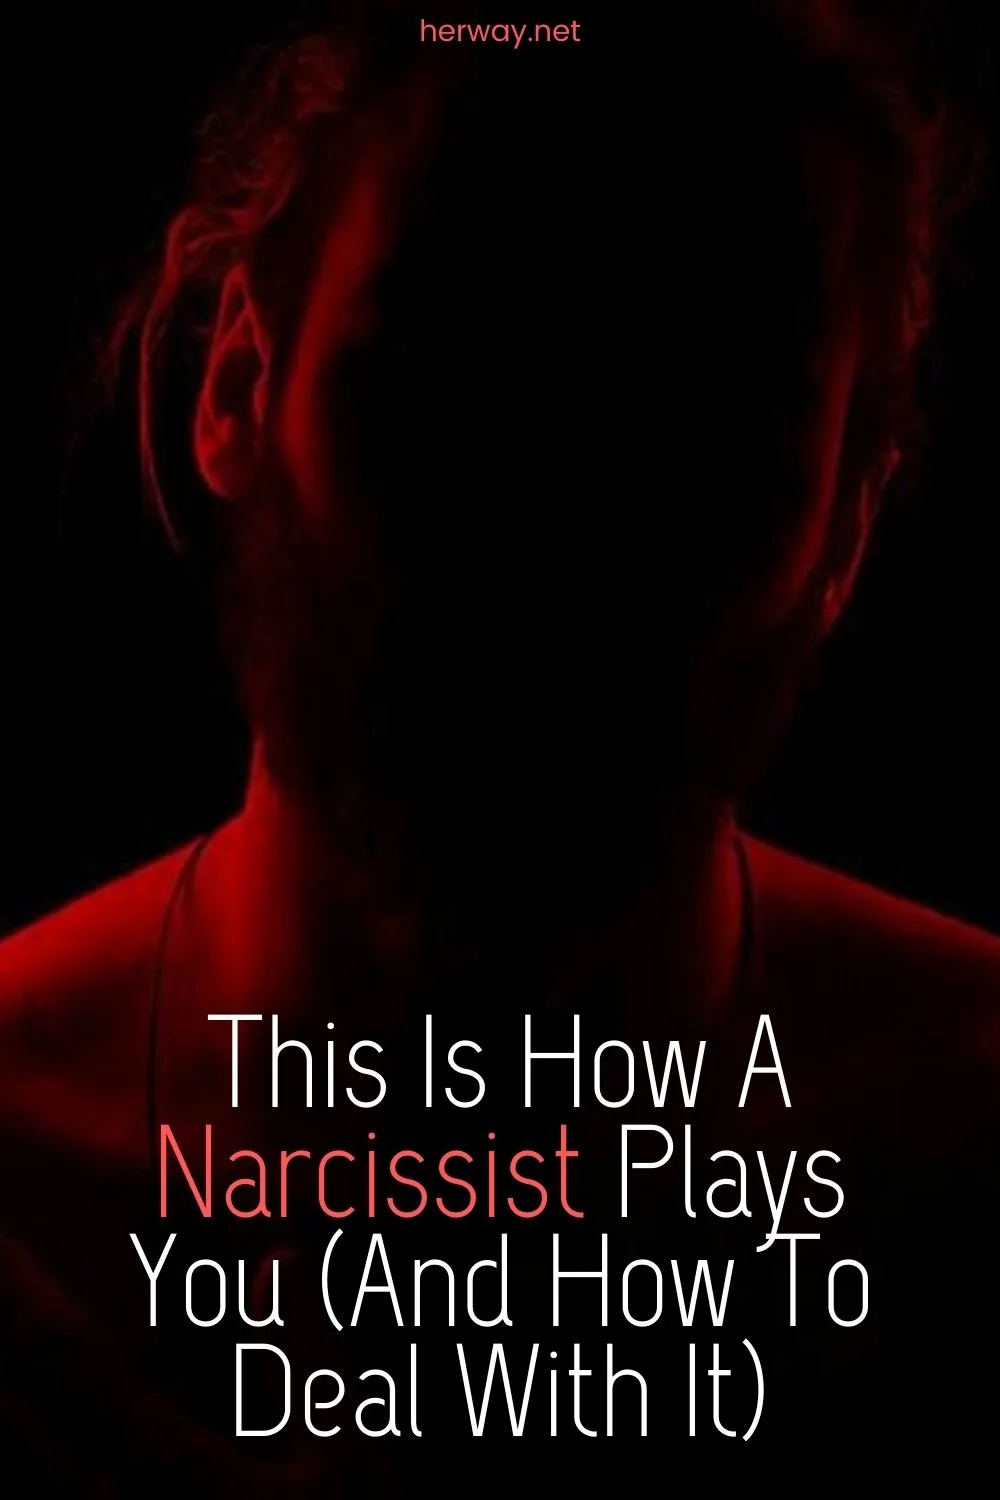 This Is How A Narcissist Plays You (And How To Deal With It)